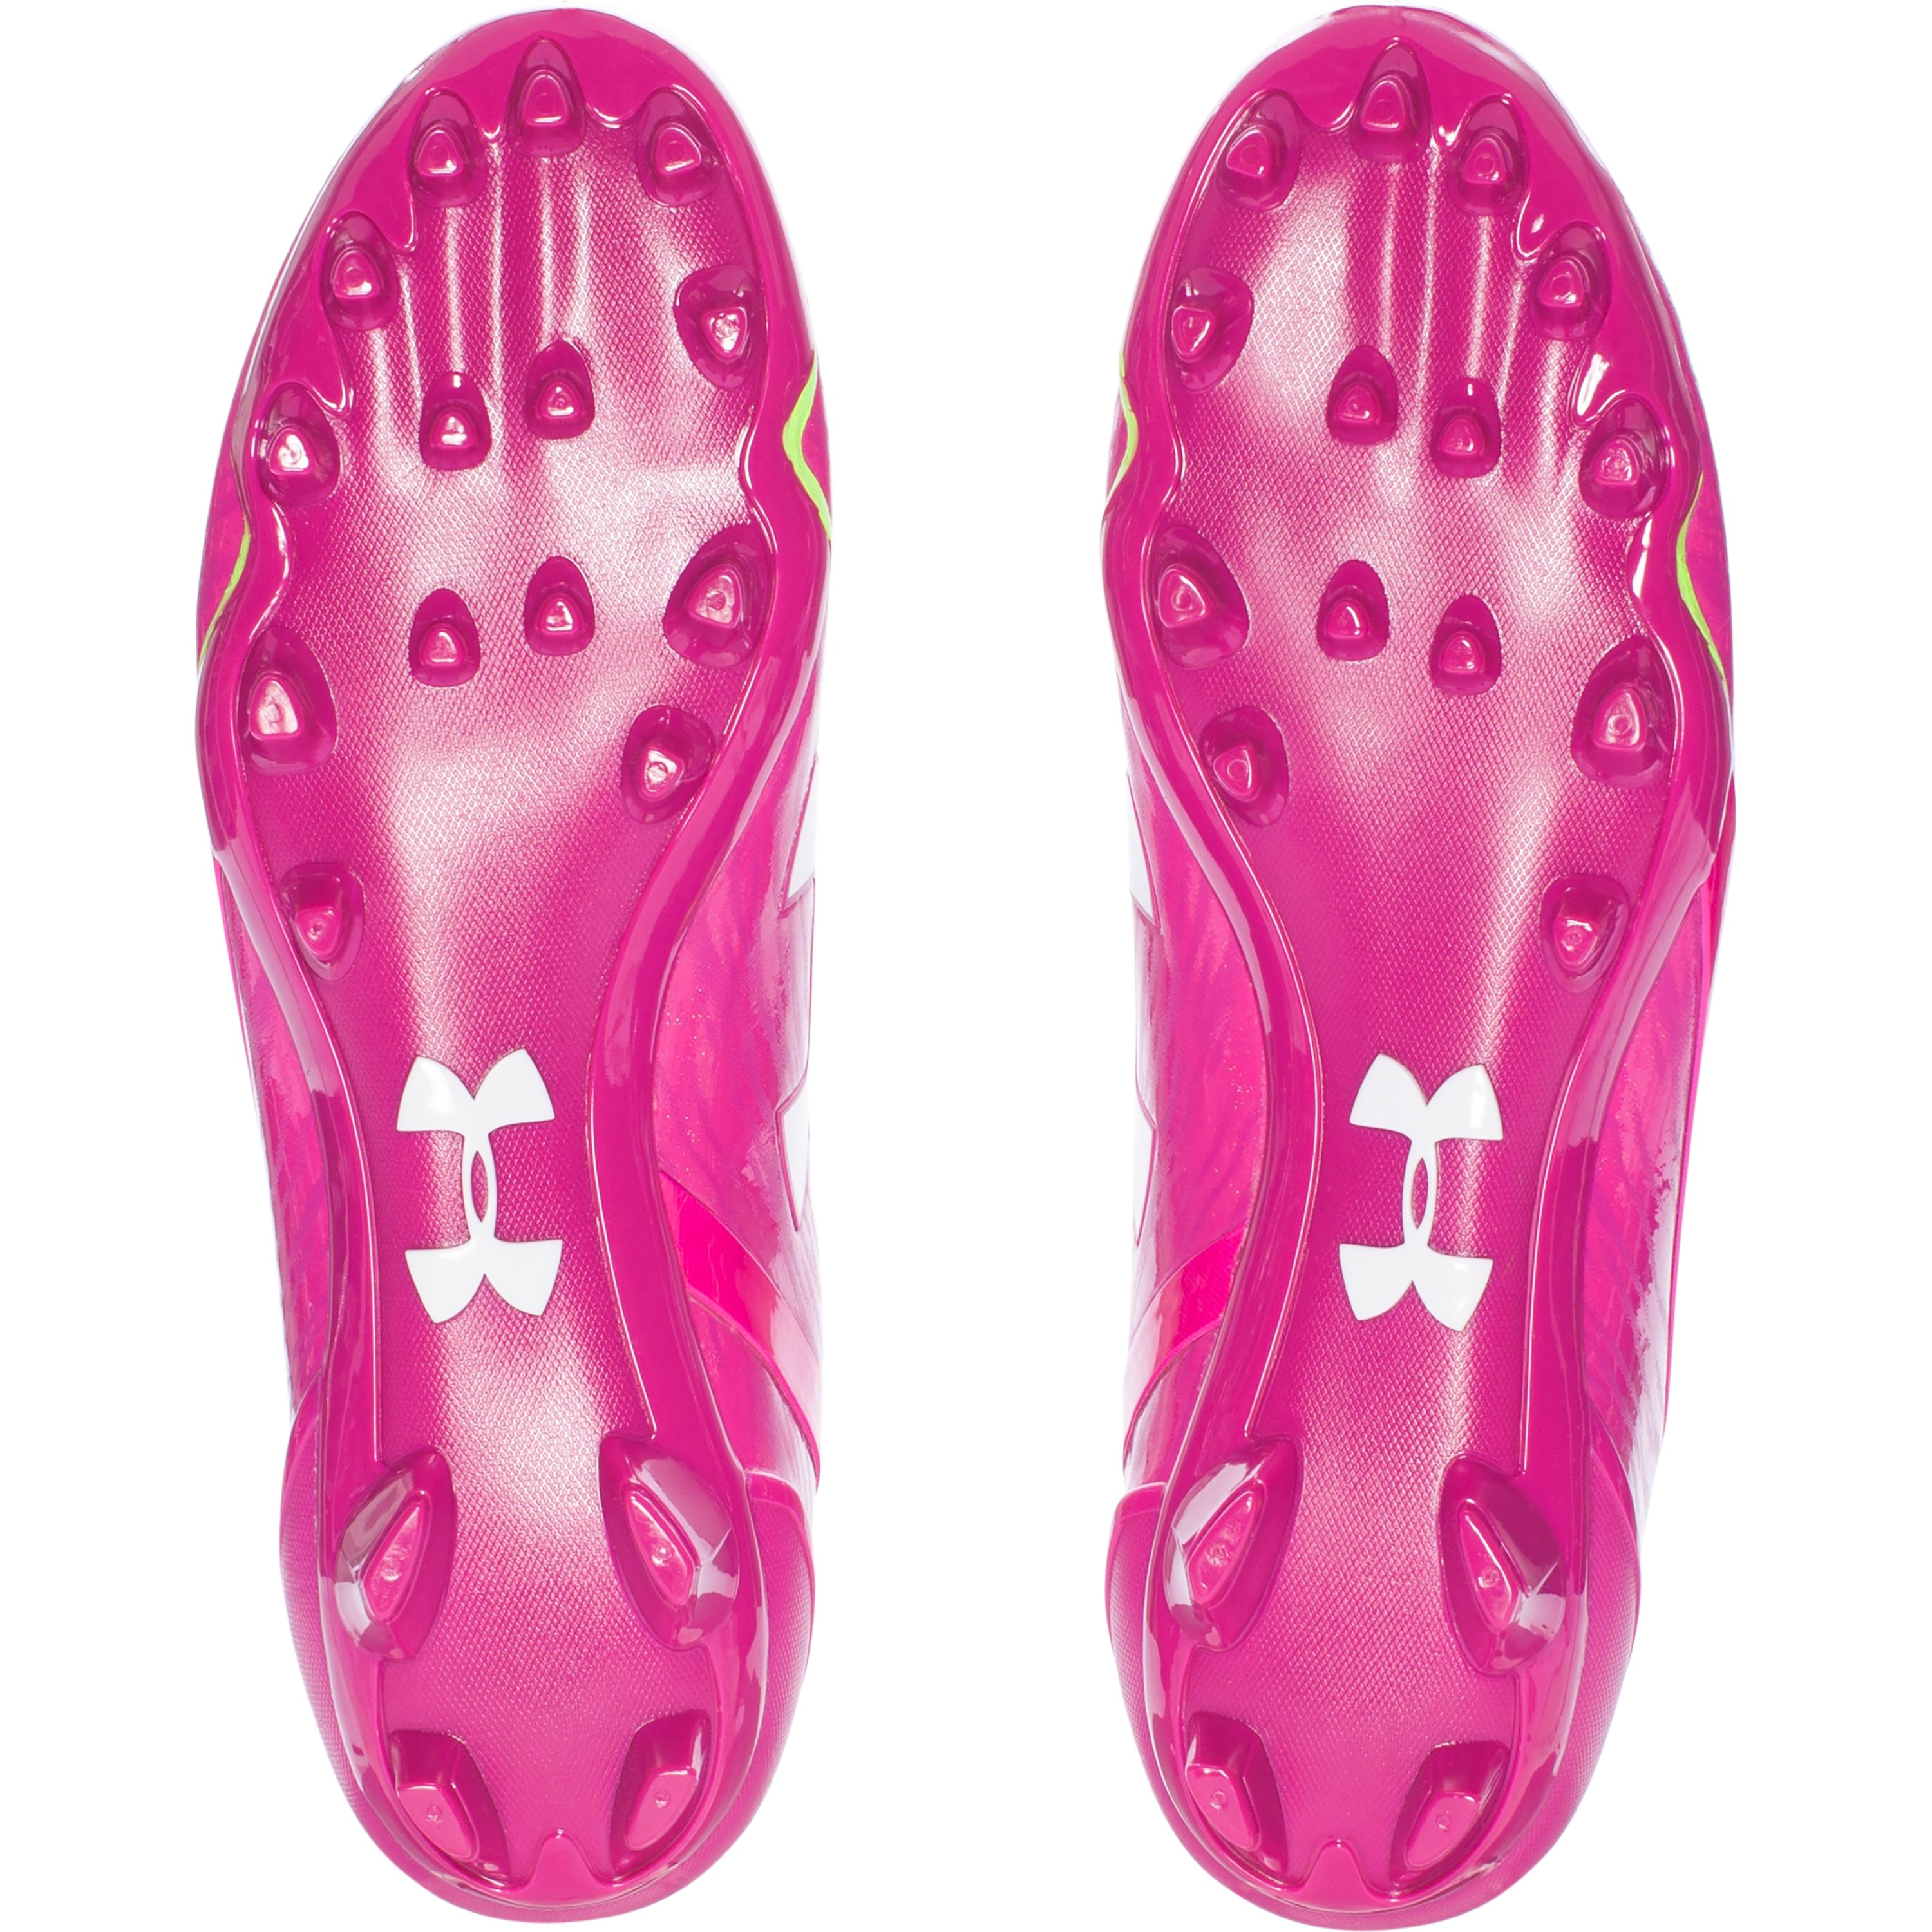 Spotlight Under Lyst | Ua – Pink Edition Men for Football Men\'s in Armour Cleats Limited